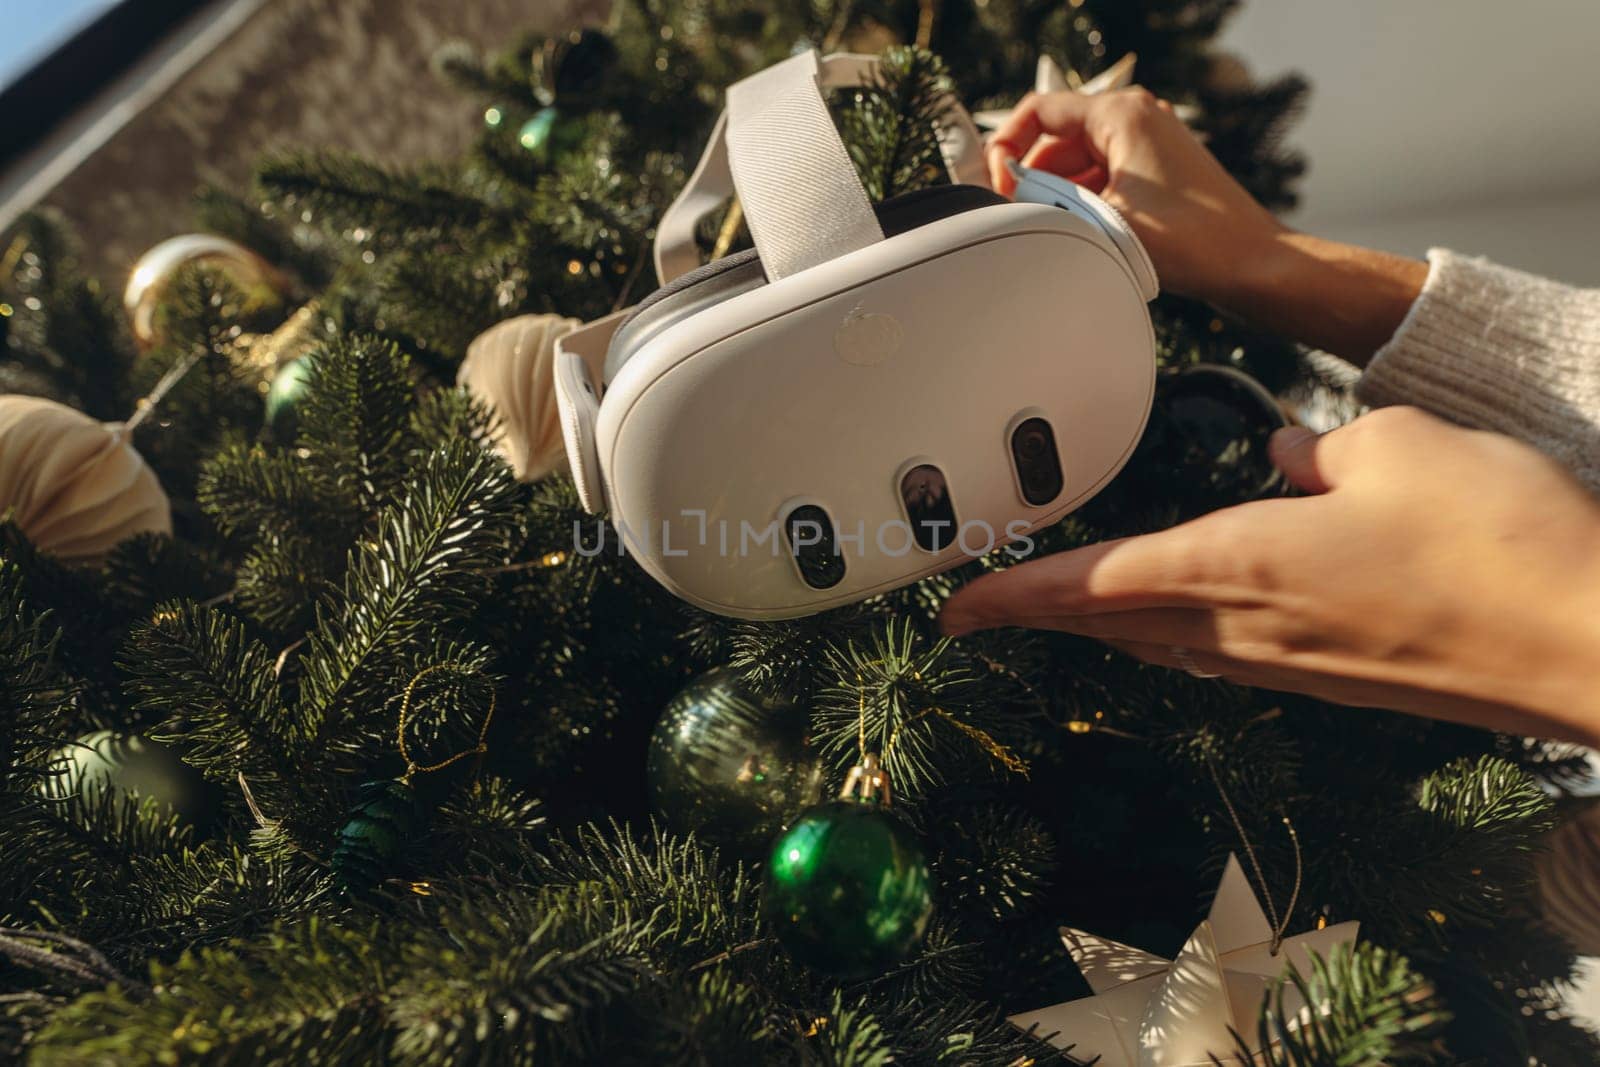 With a Christmas tree in the background, a girl is holding a virtual reality headset. High quality photo